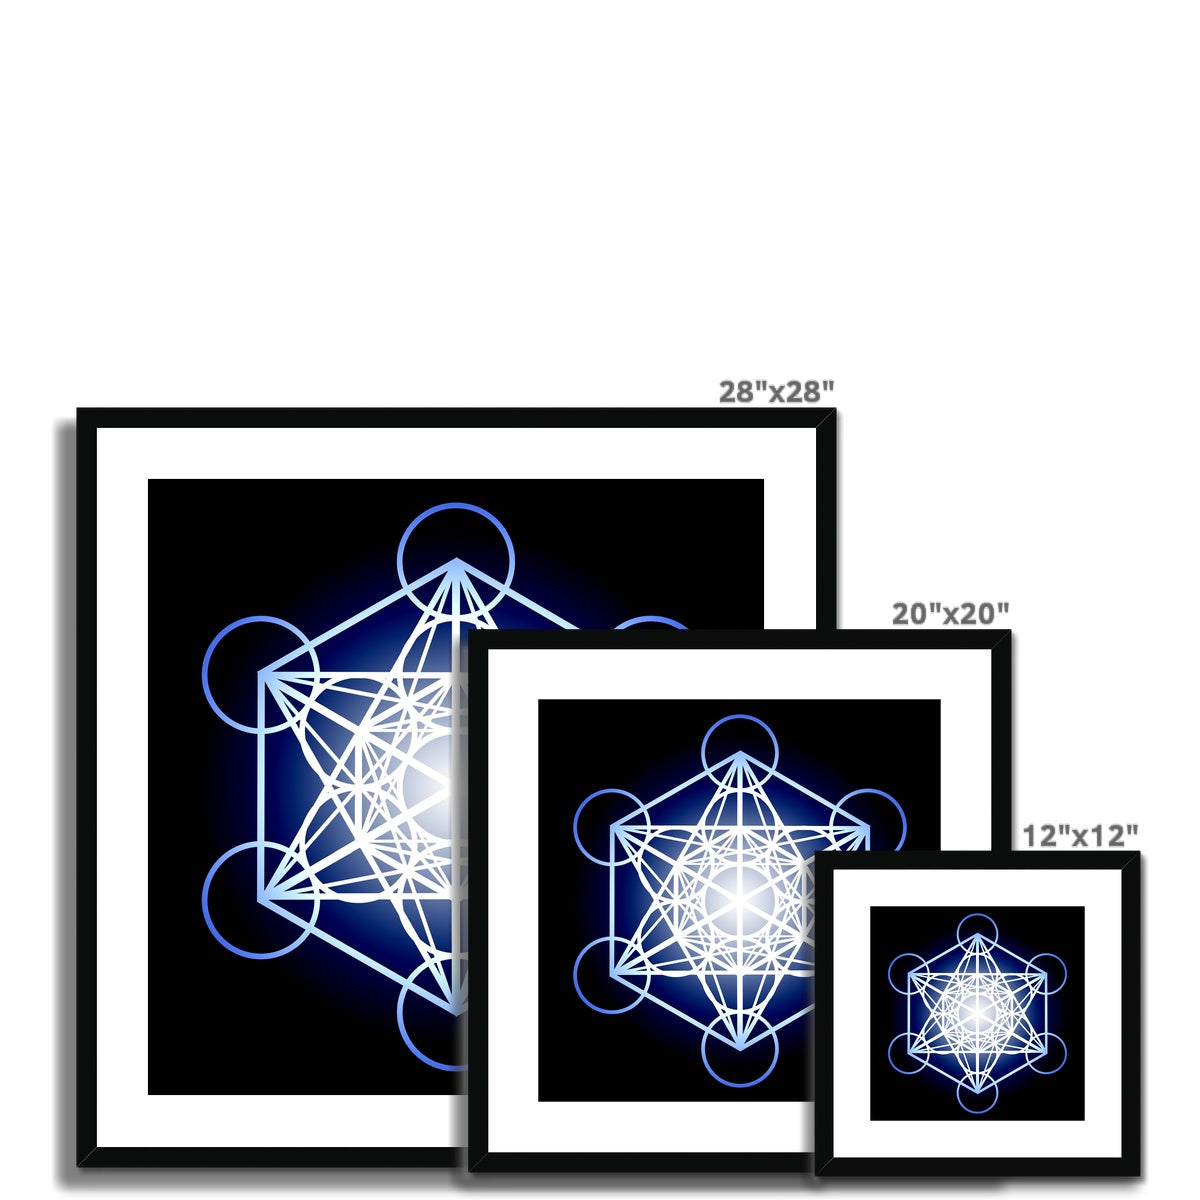 Metatron's Cube in Blue Framed & Mounted Print - Nature of Flowers